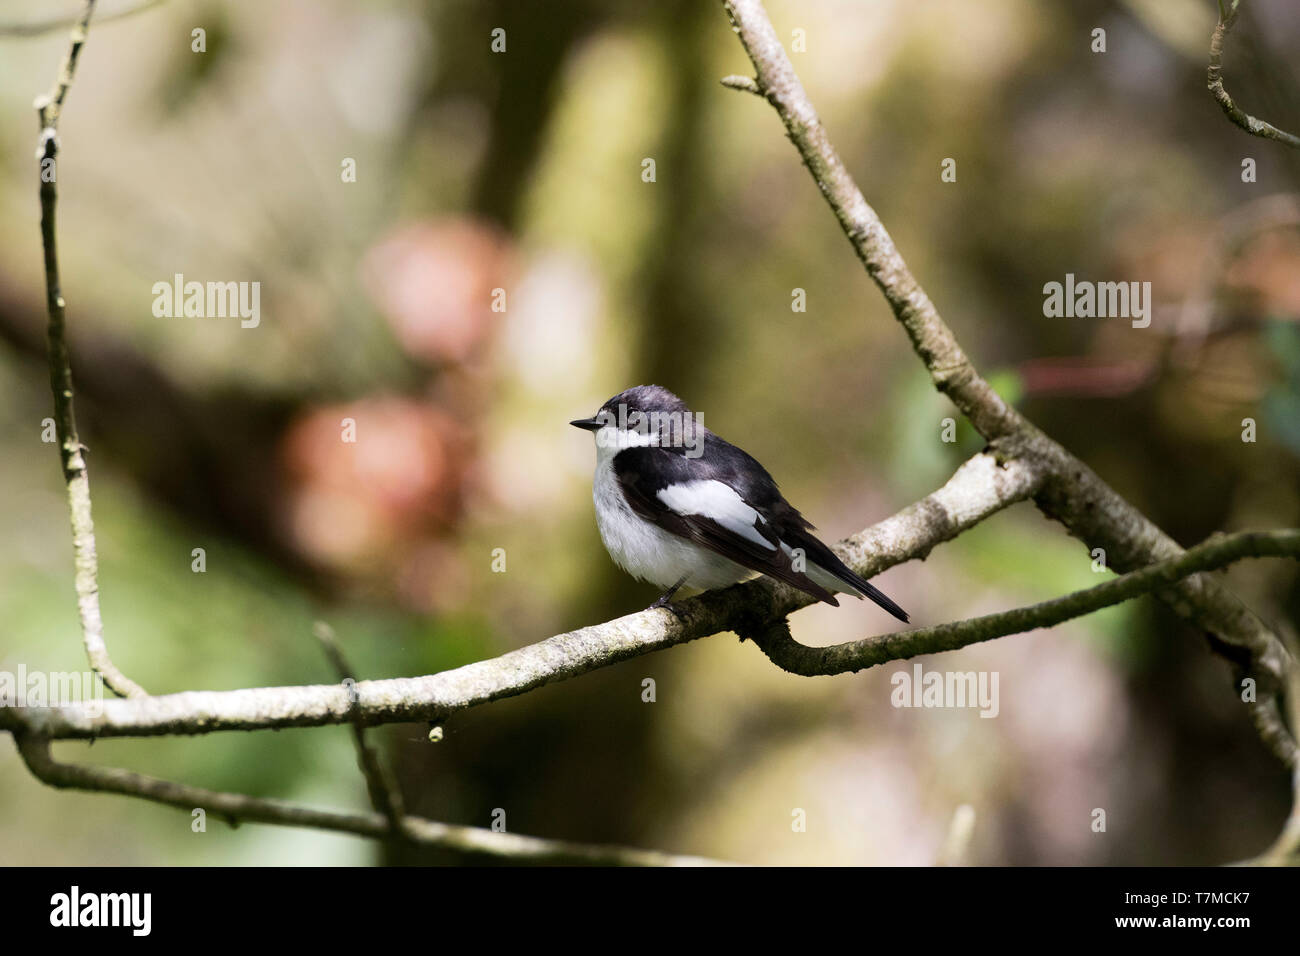 Male Pied Flycatcher,Ficedula hypoleuca, on a branch in a natural woodland, Powys, Wales,U.K. May 2009 Stock Photo